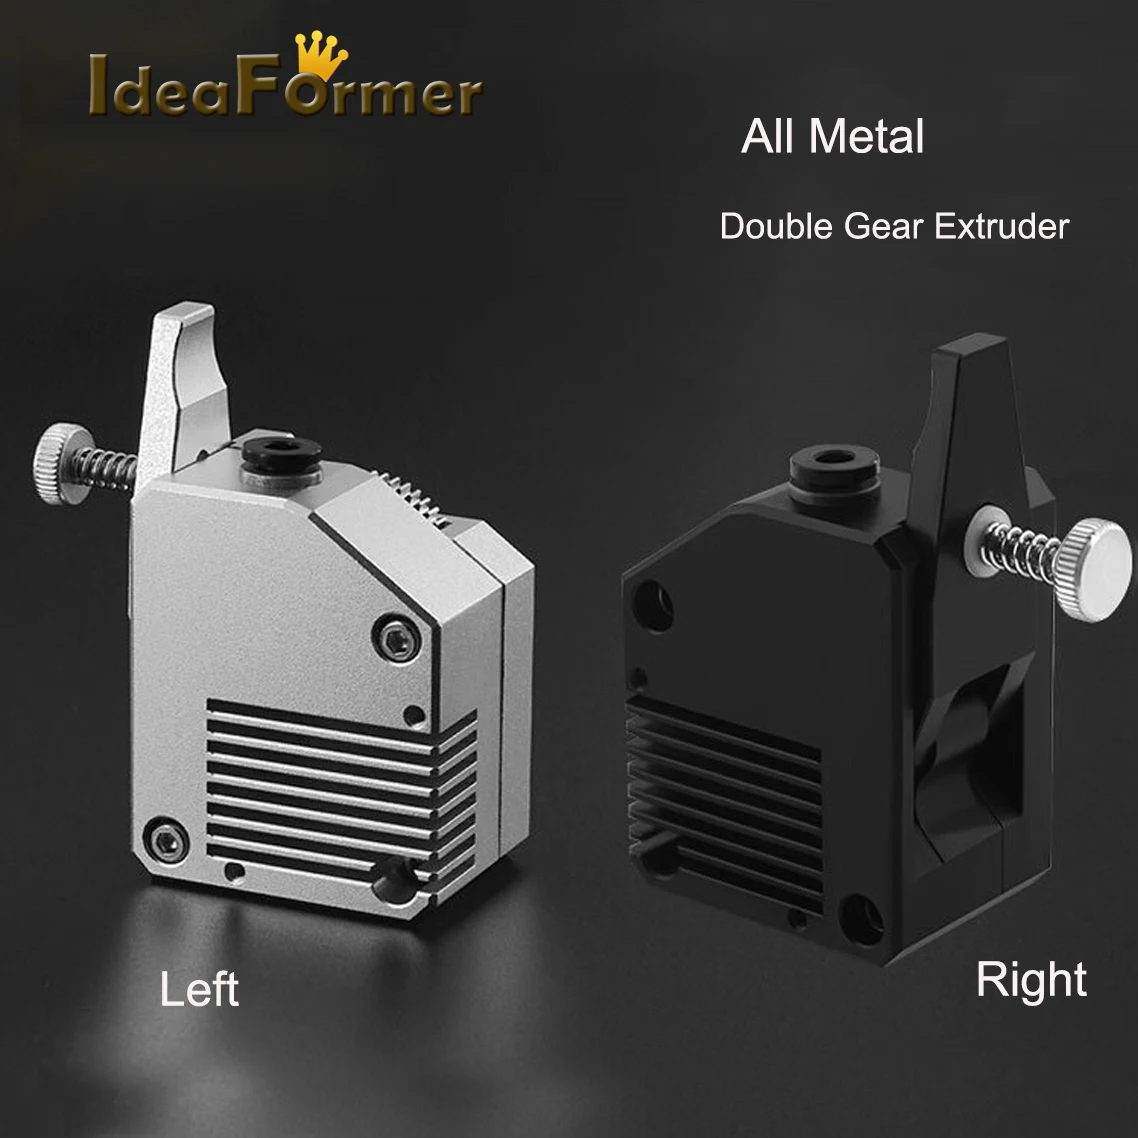 

All Metal Dual Drive Extruder Right/Left Cloned Btech Bowden For Extruder Creality CR10 Mk3 Wanhao D9 Ender 3 Prusa I3 Anet E10